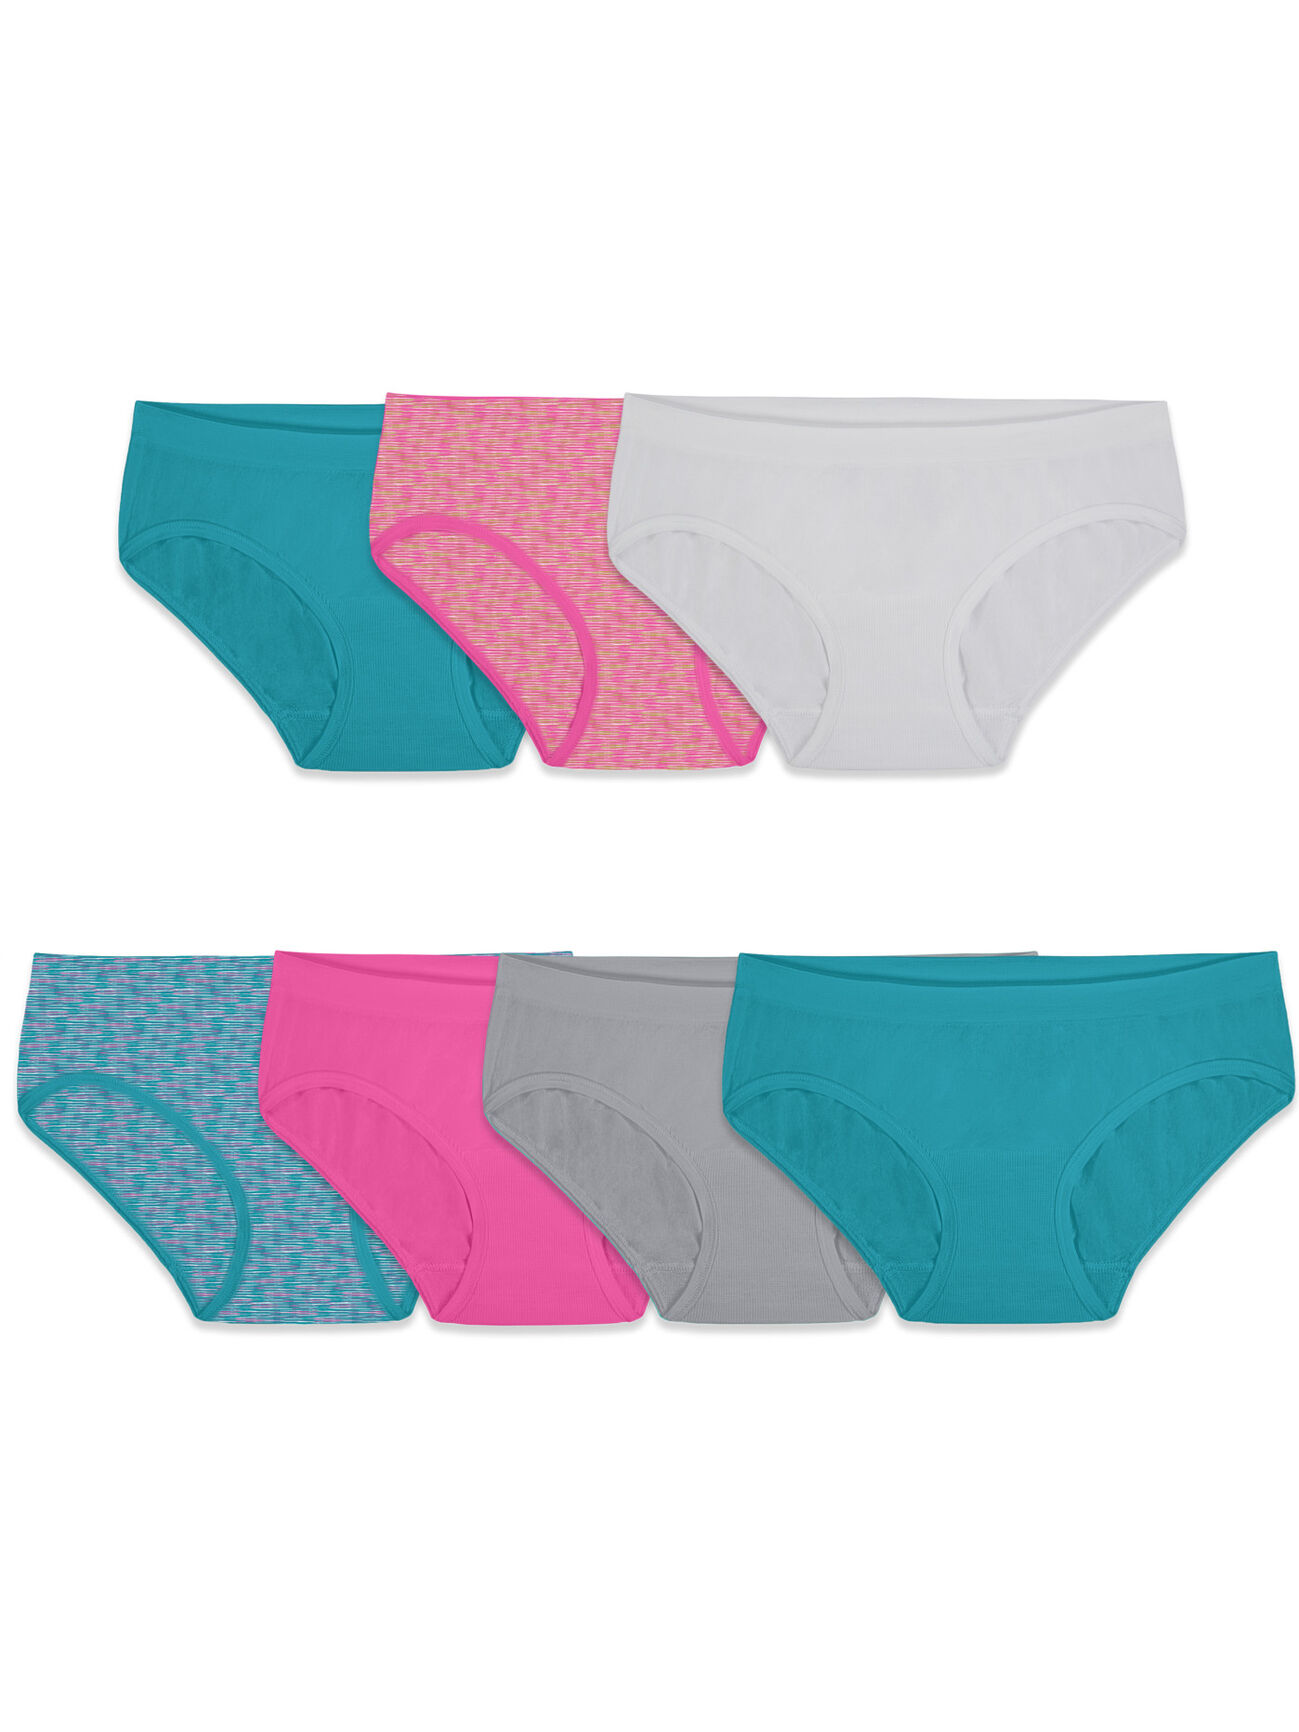 Buy Fruit of the Loom Girls' Big Cotton Low Rise Brief Underwear, 10 Pack -  Fashion Assorted, 10 at